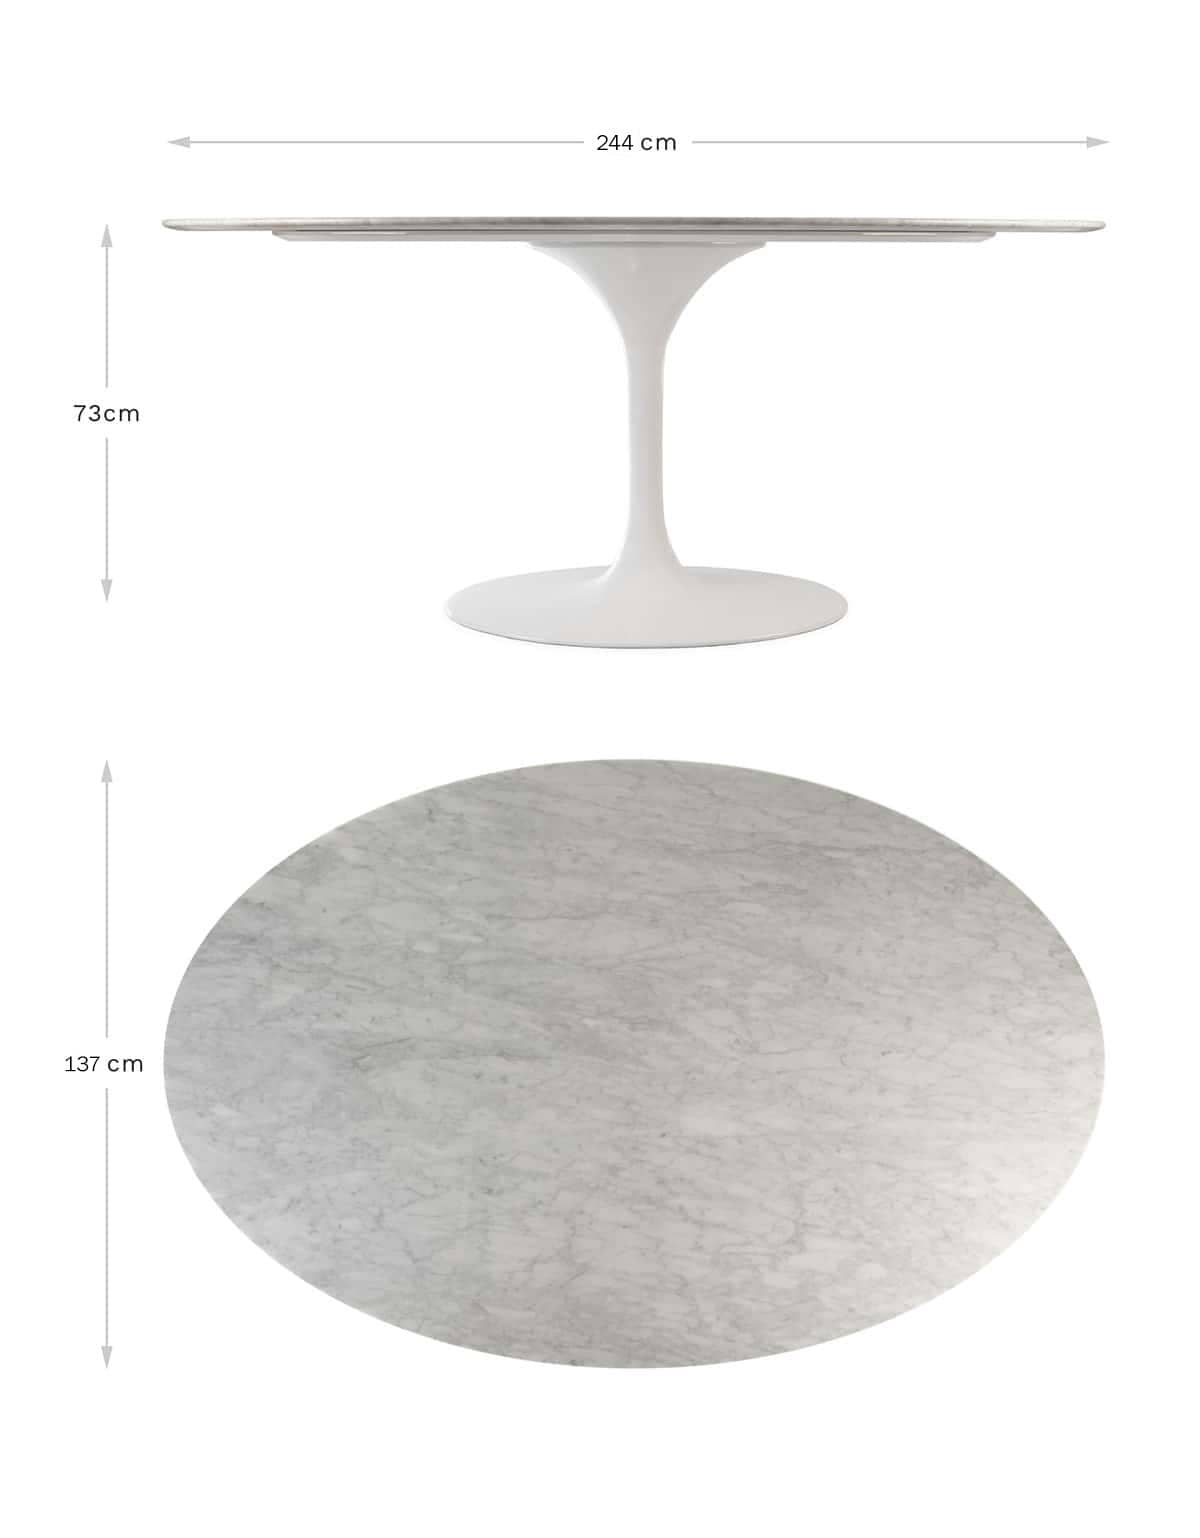 Made for mobile, a static side on view and top down shot is used to visually represent the length, height and width dimension of the 244 x 137 Tulip table